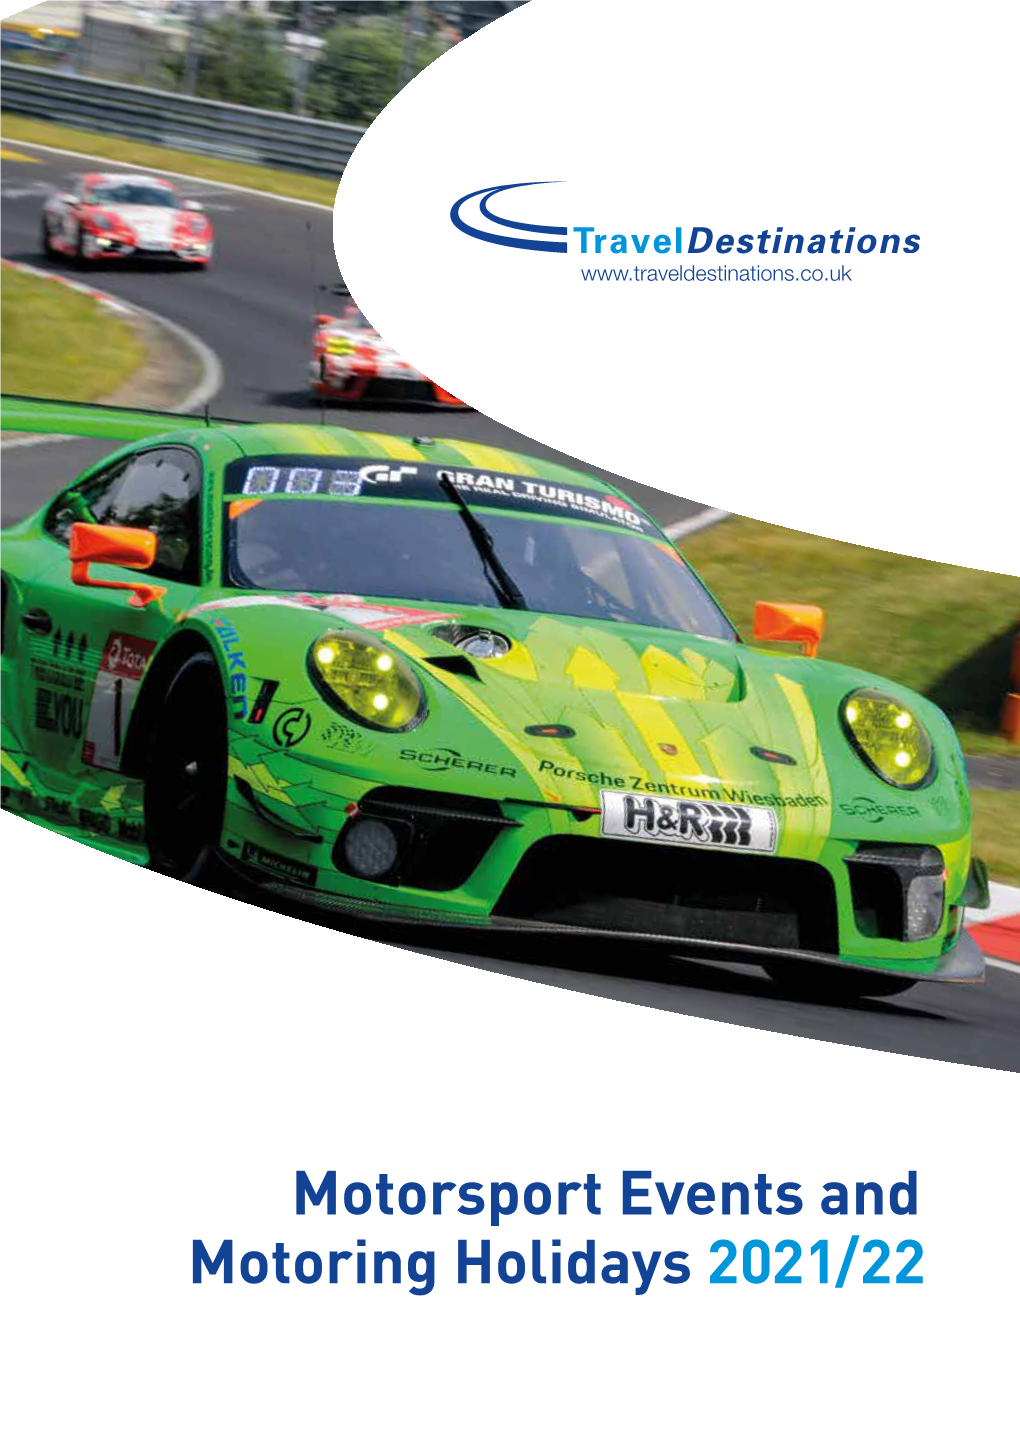 Motorsport Events and Motoring Holidays 2021/22